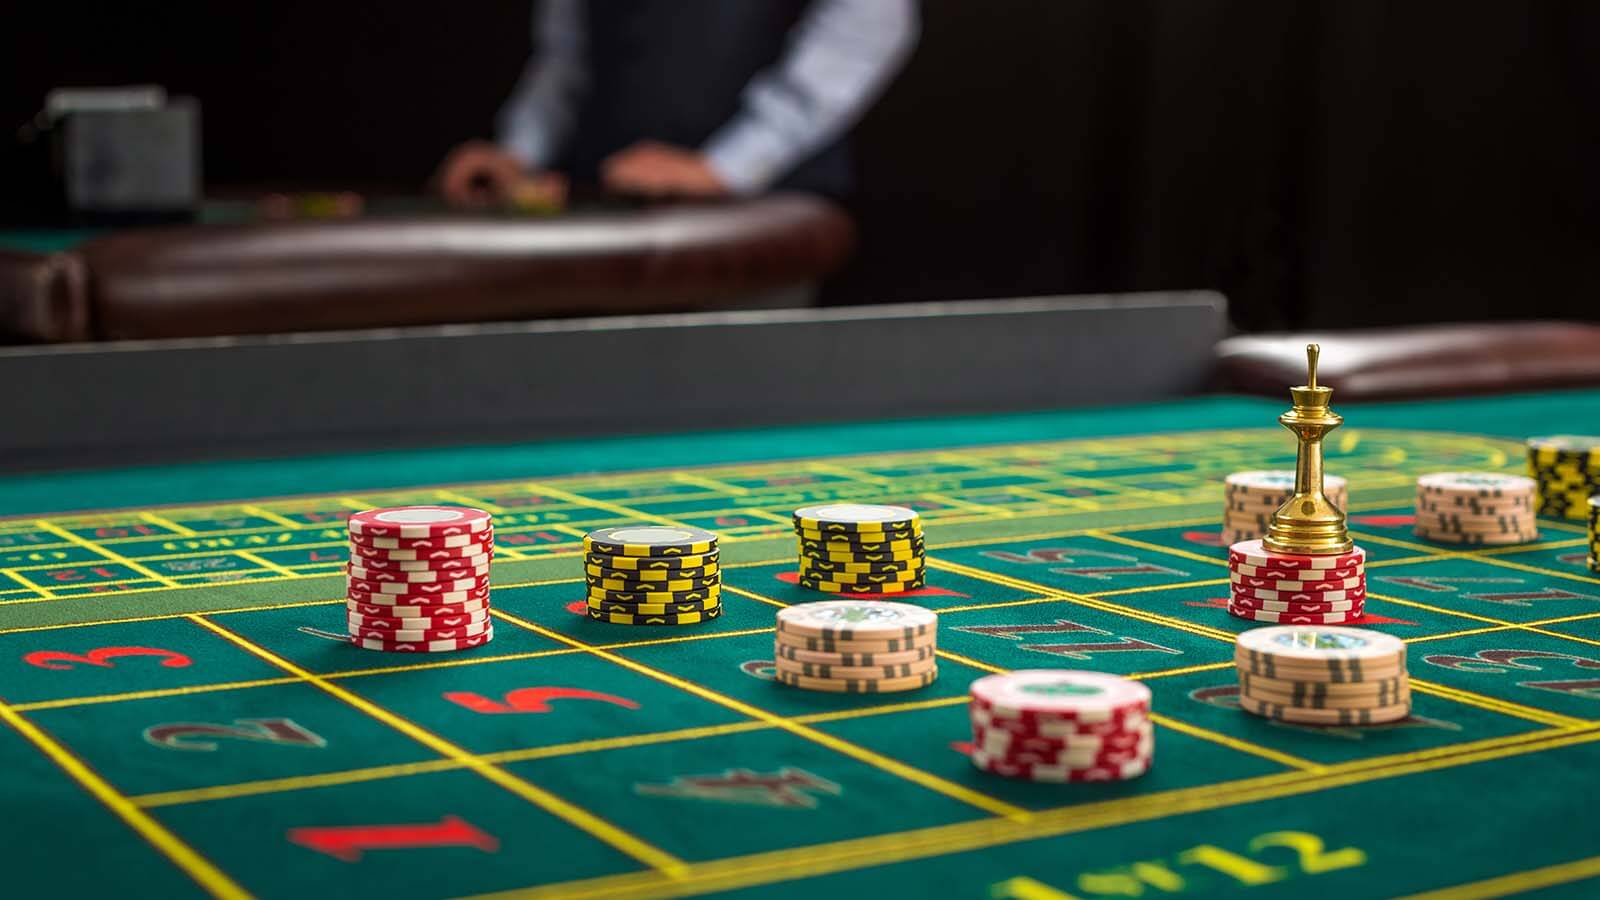 10 Ways to Win at Roulette by Improving Odds